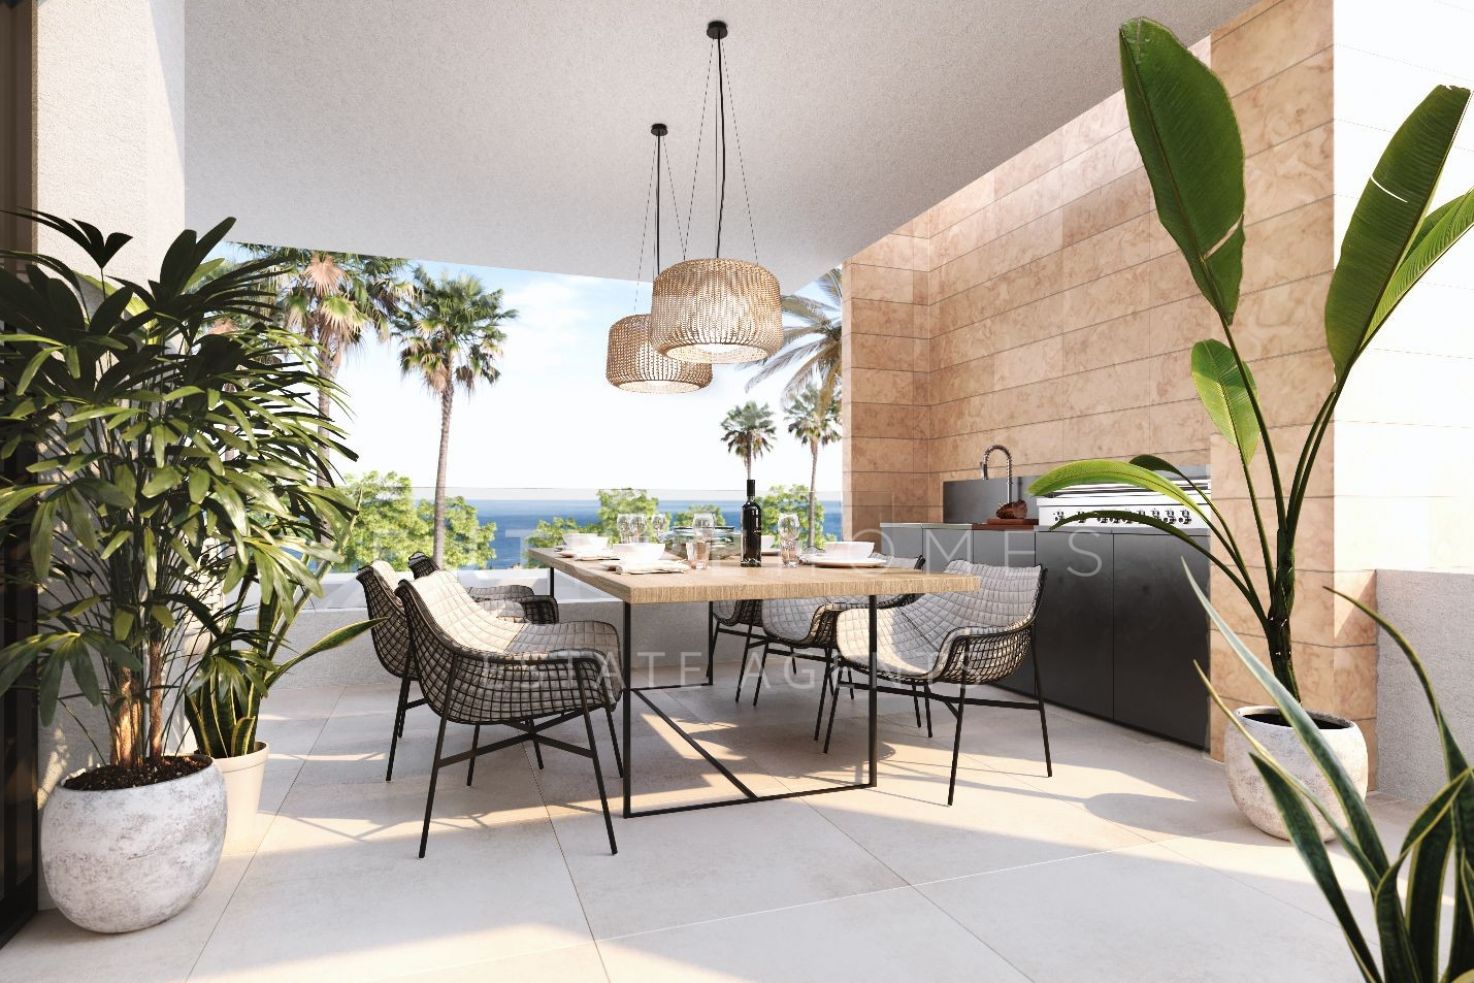 LOCATION, LOCATION, LOCATION!  Fantastic new off plan apartments opposite the Kempinski 5 star Hotel and within walking distance of Estepona town!